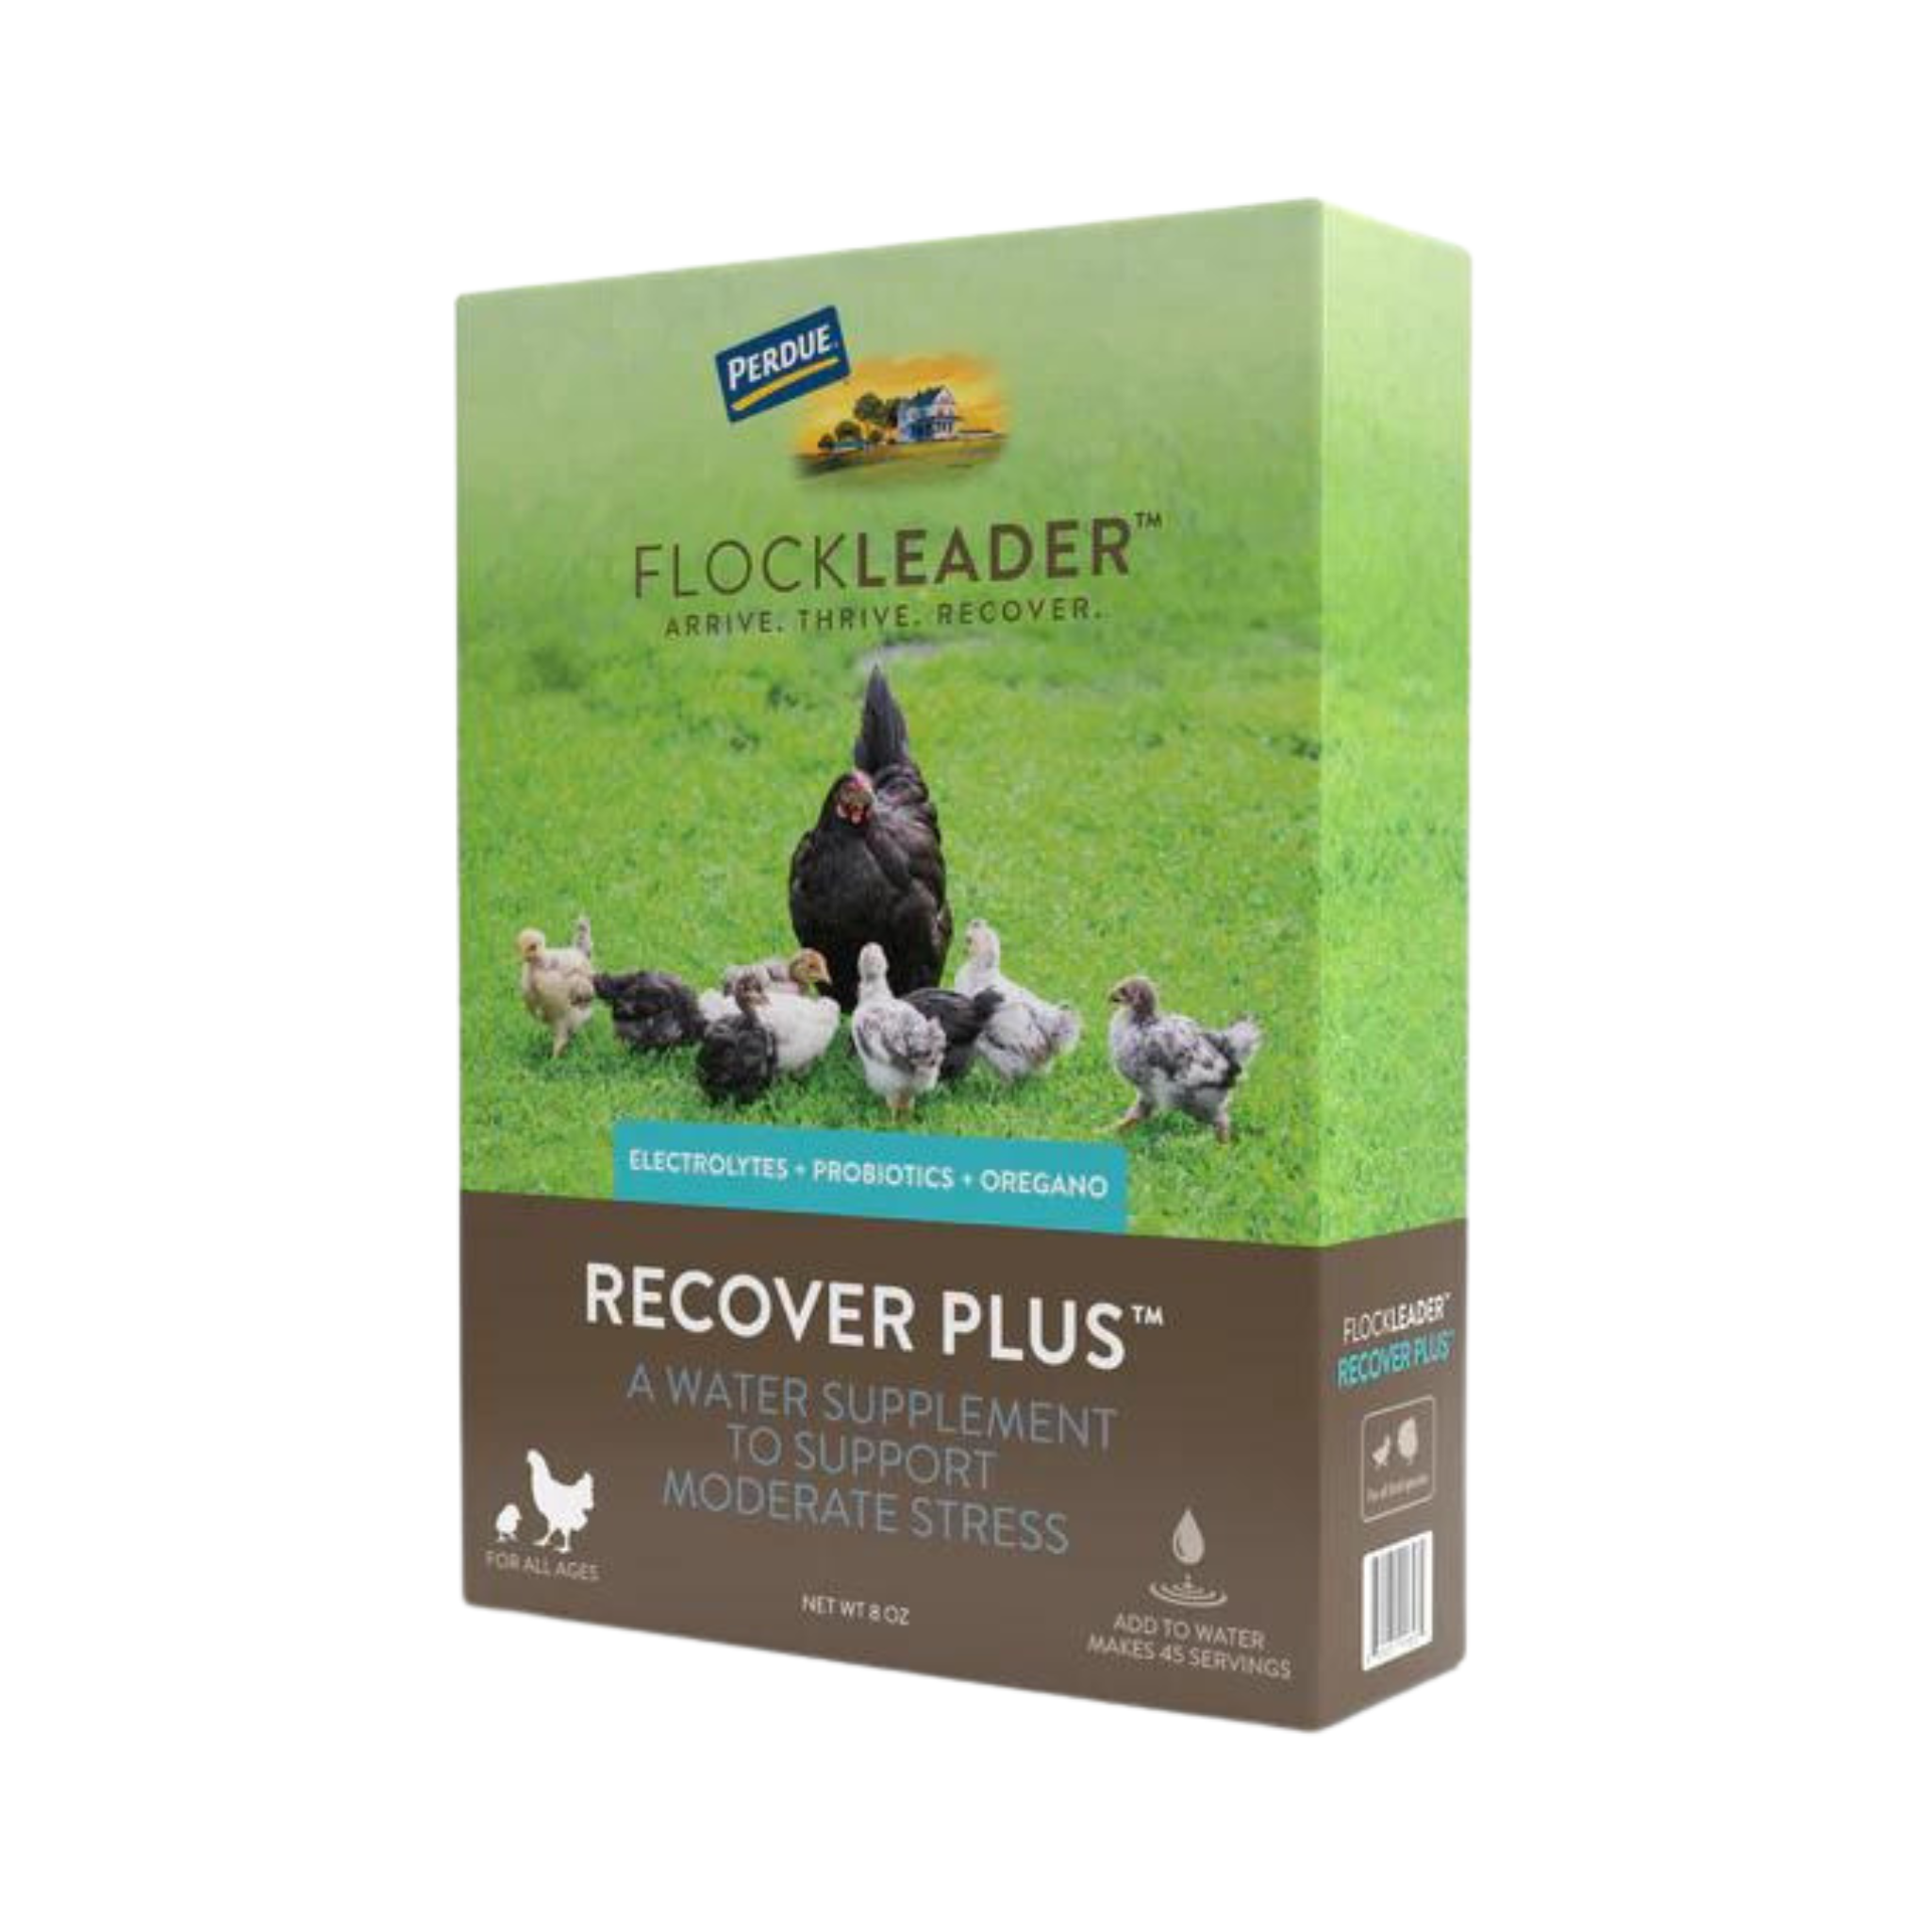 FlockLeader Recover Plus Poultry Supplement